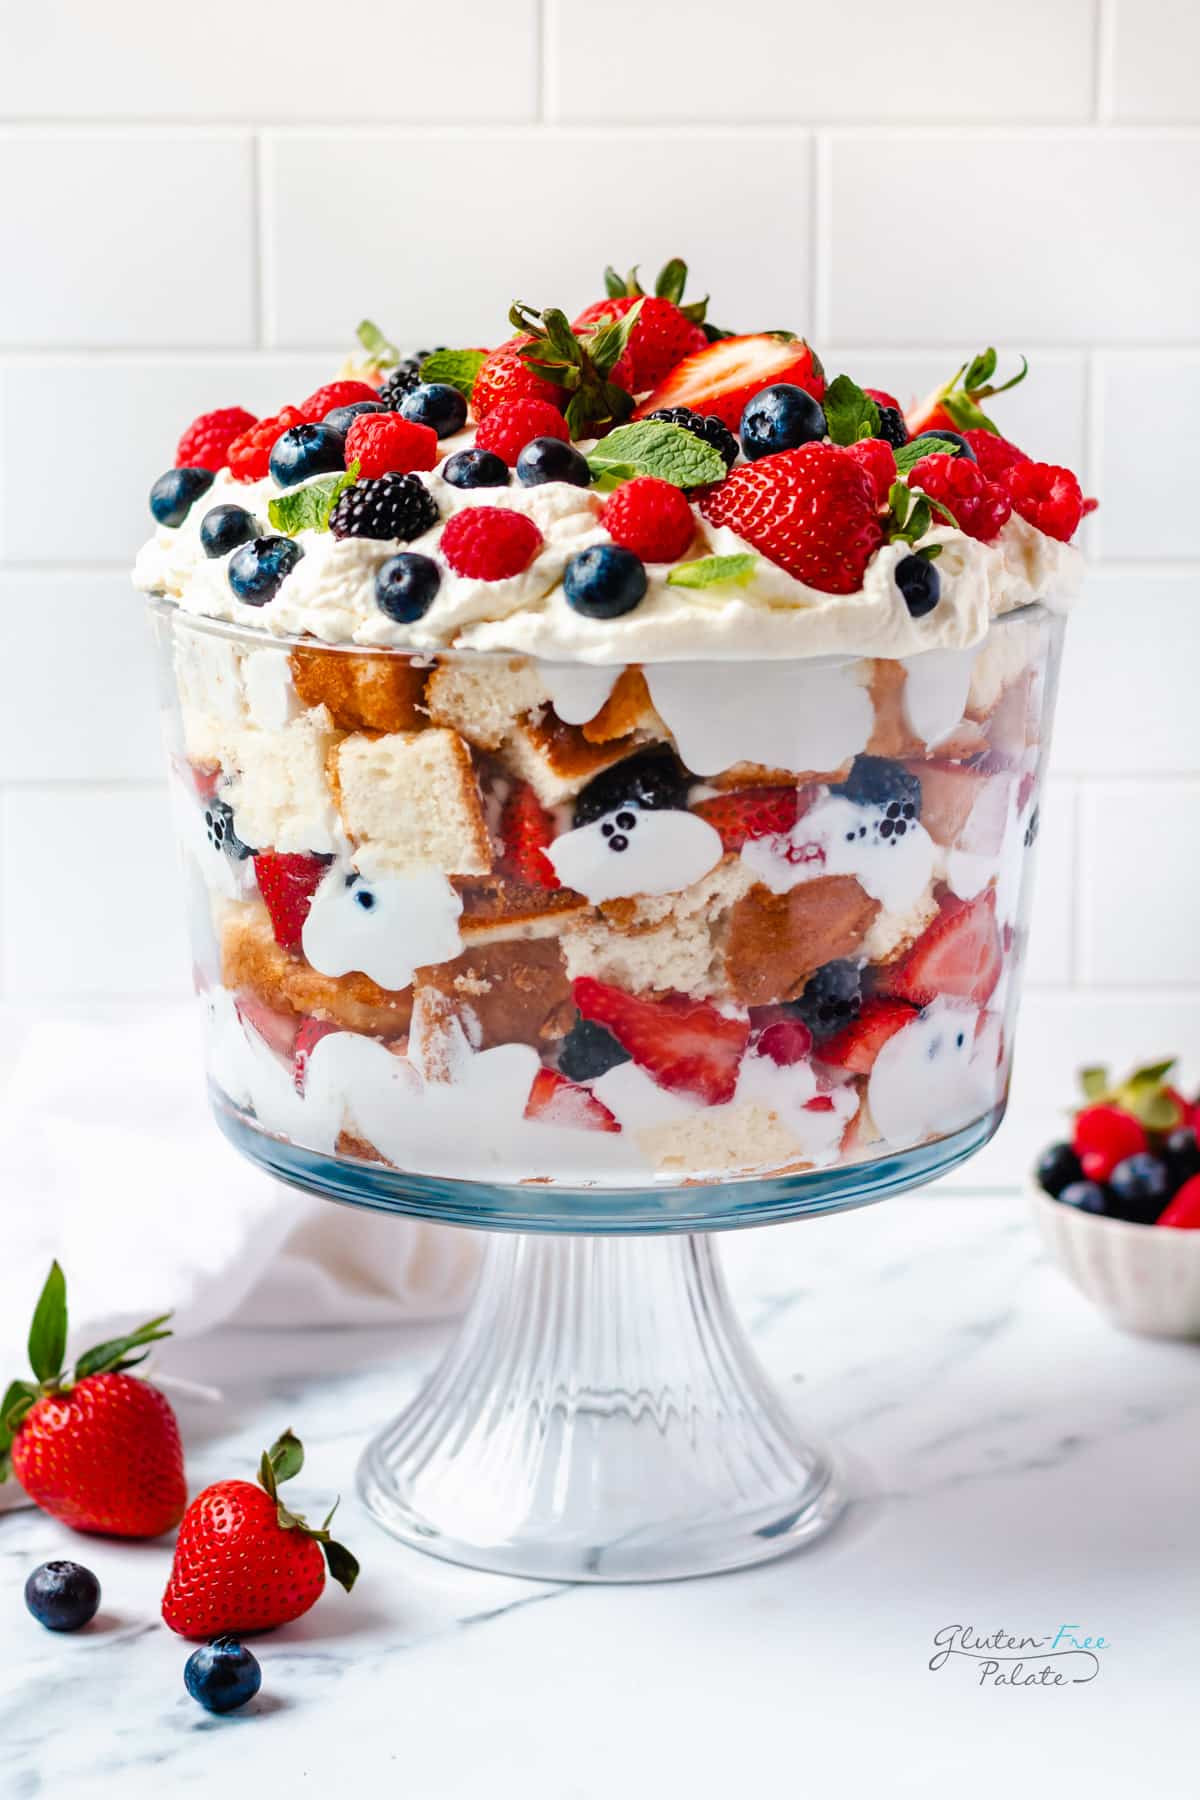 a gluten-free trifle with layers of cake, whipped cream and berries